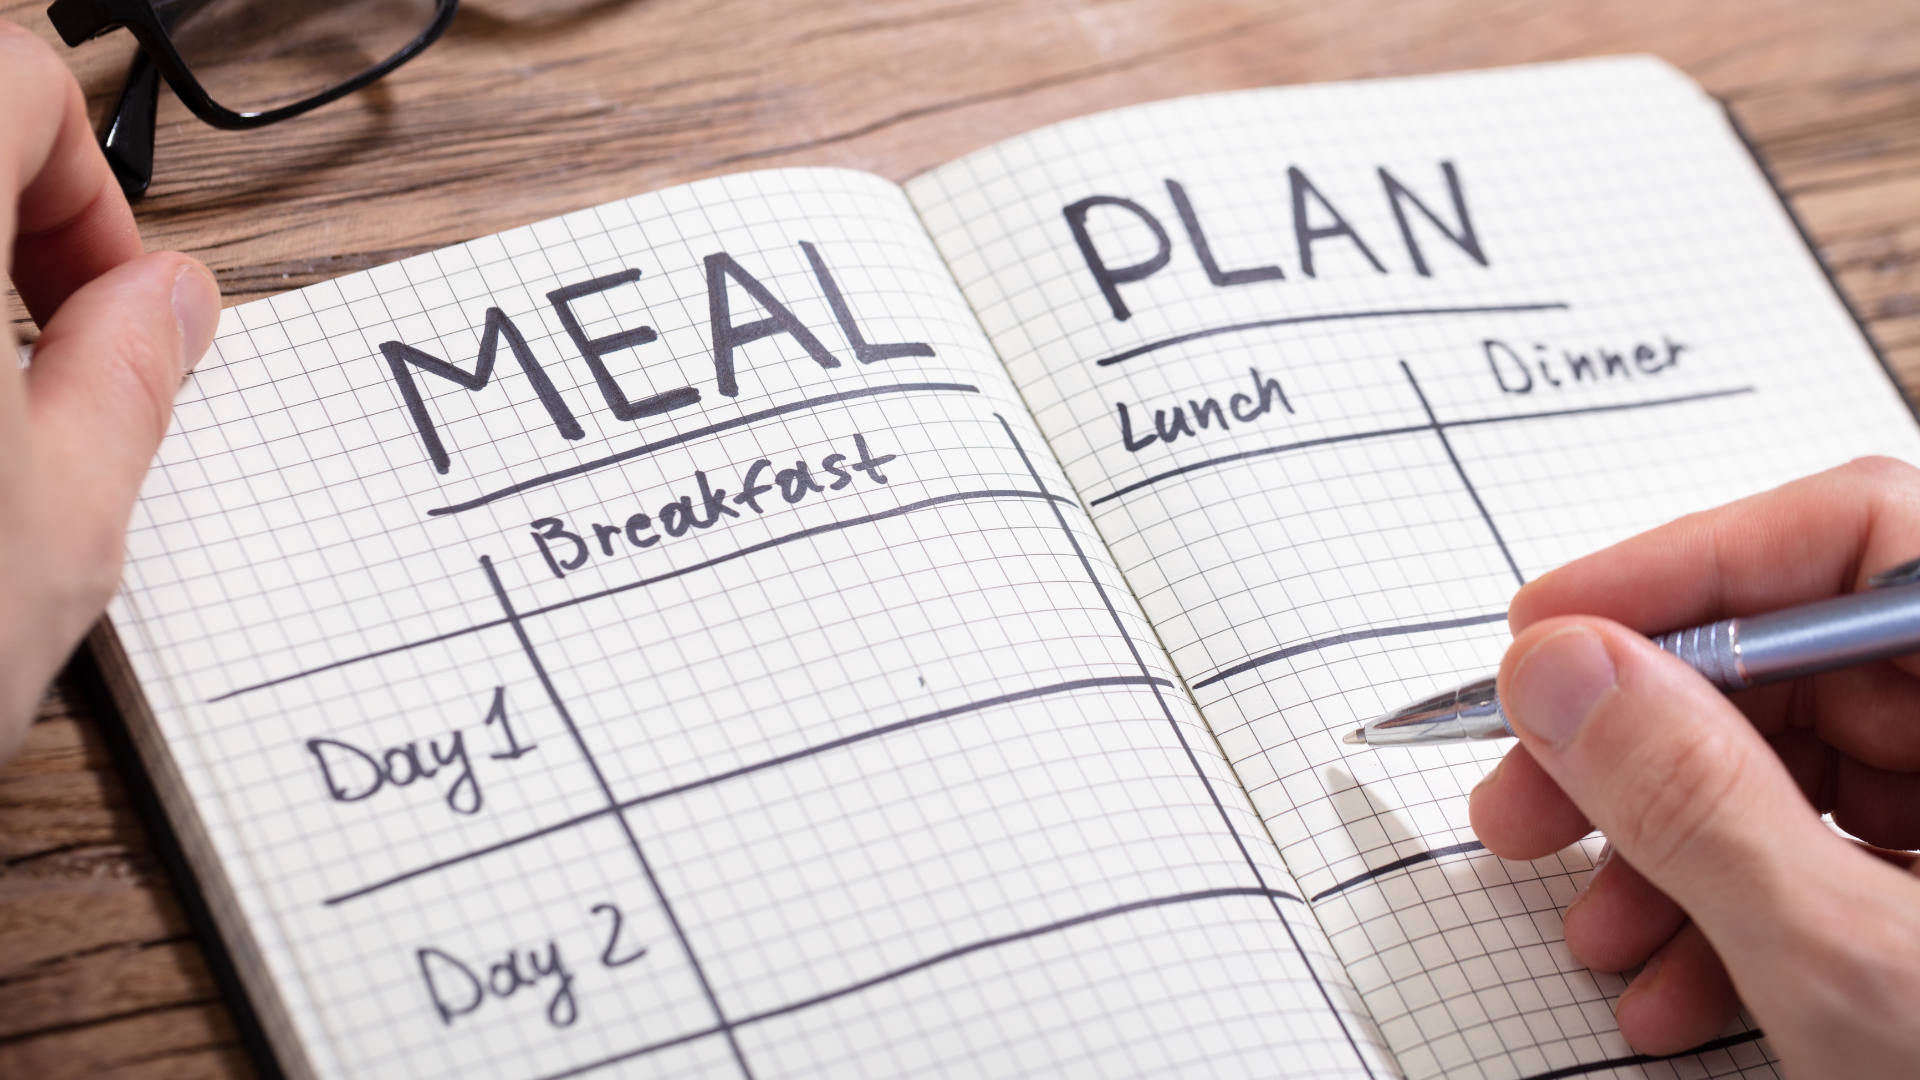 Meal planning book